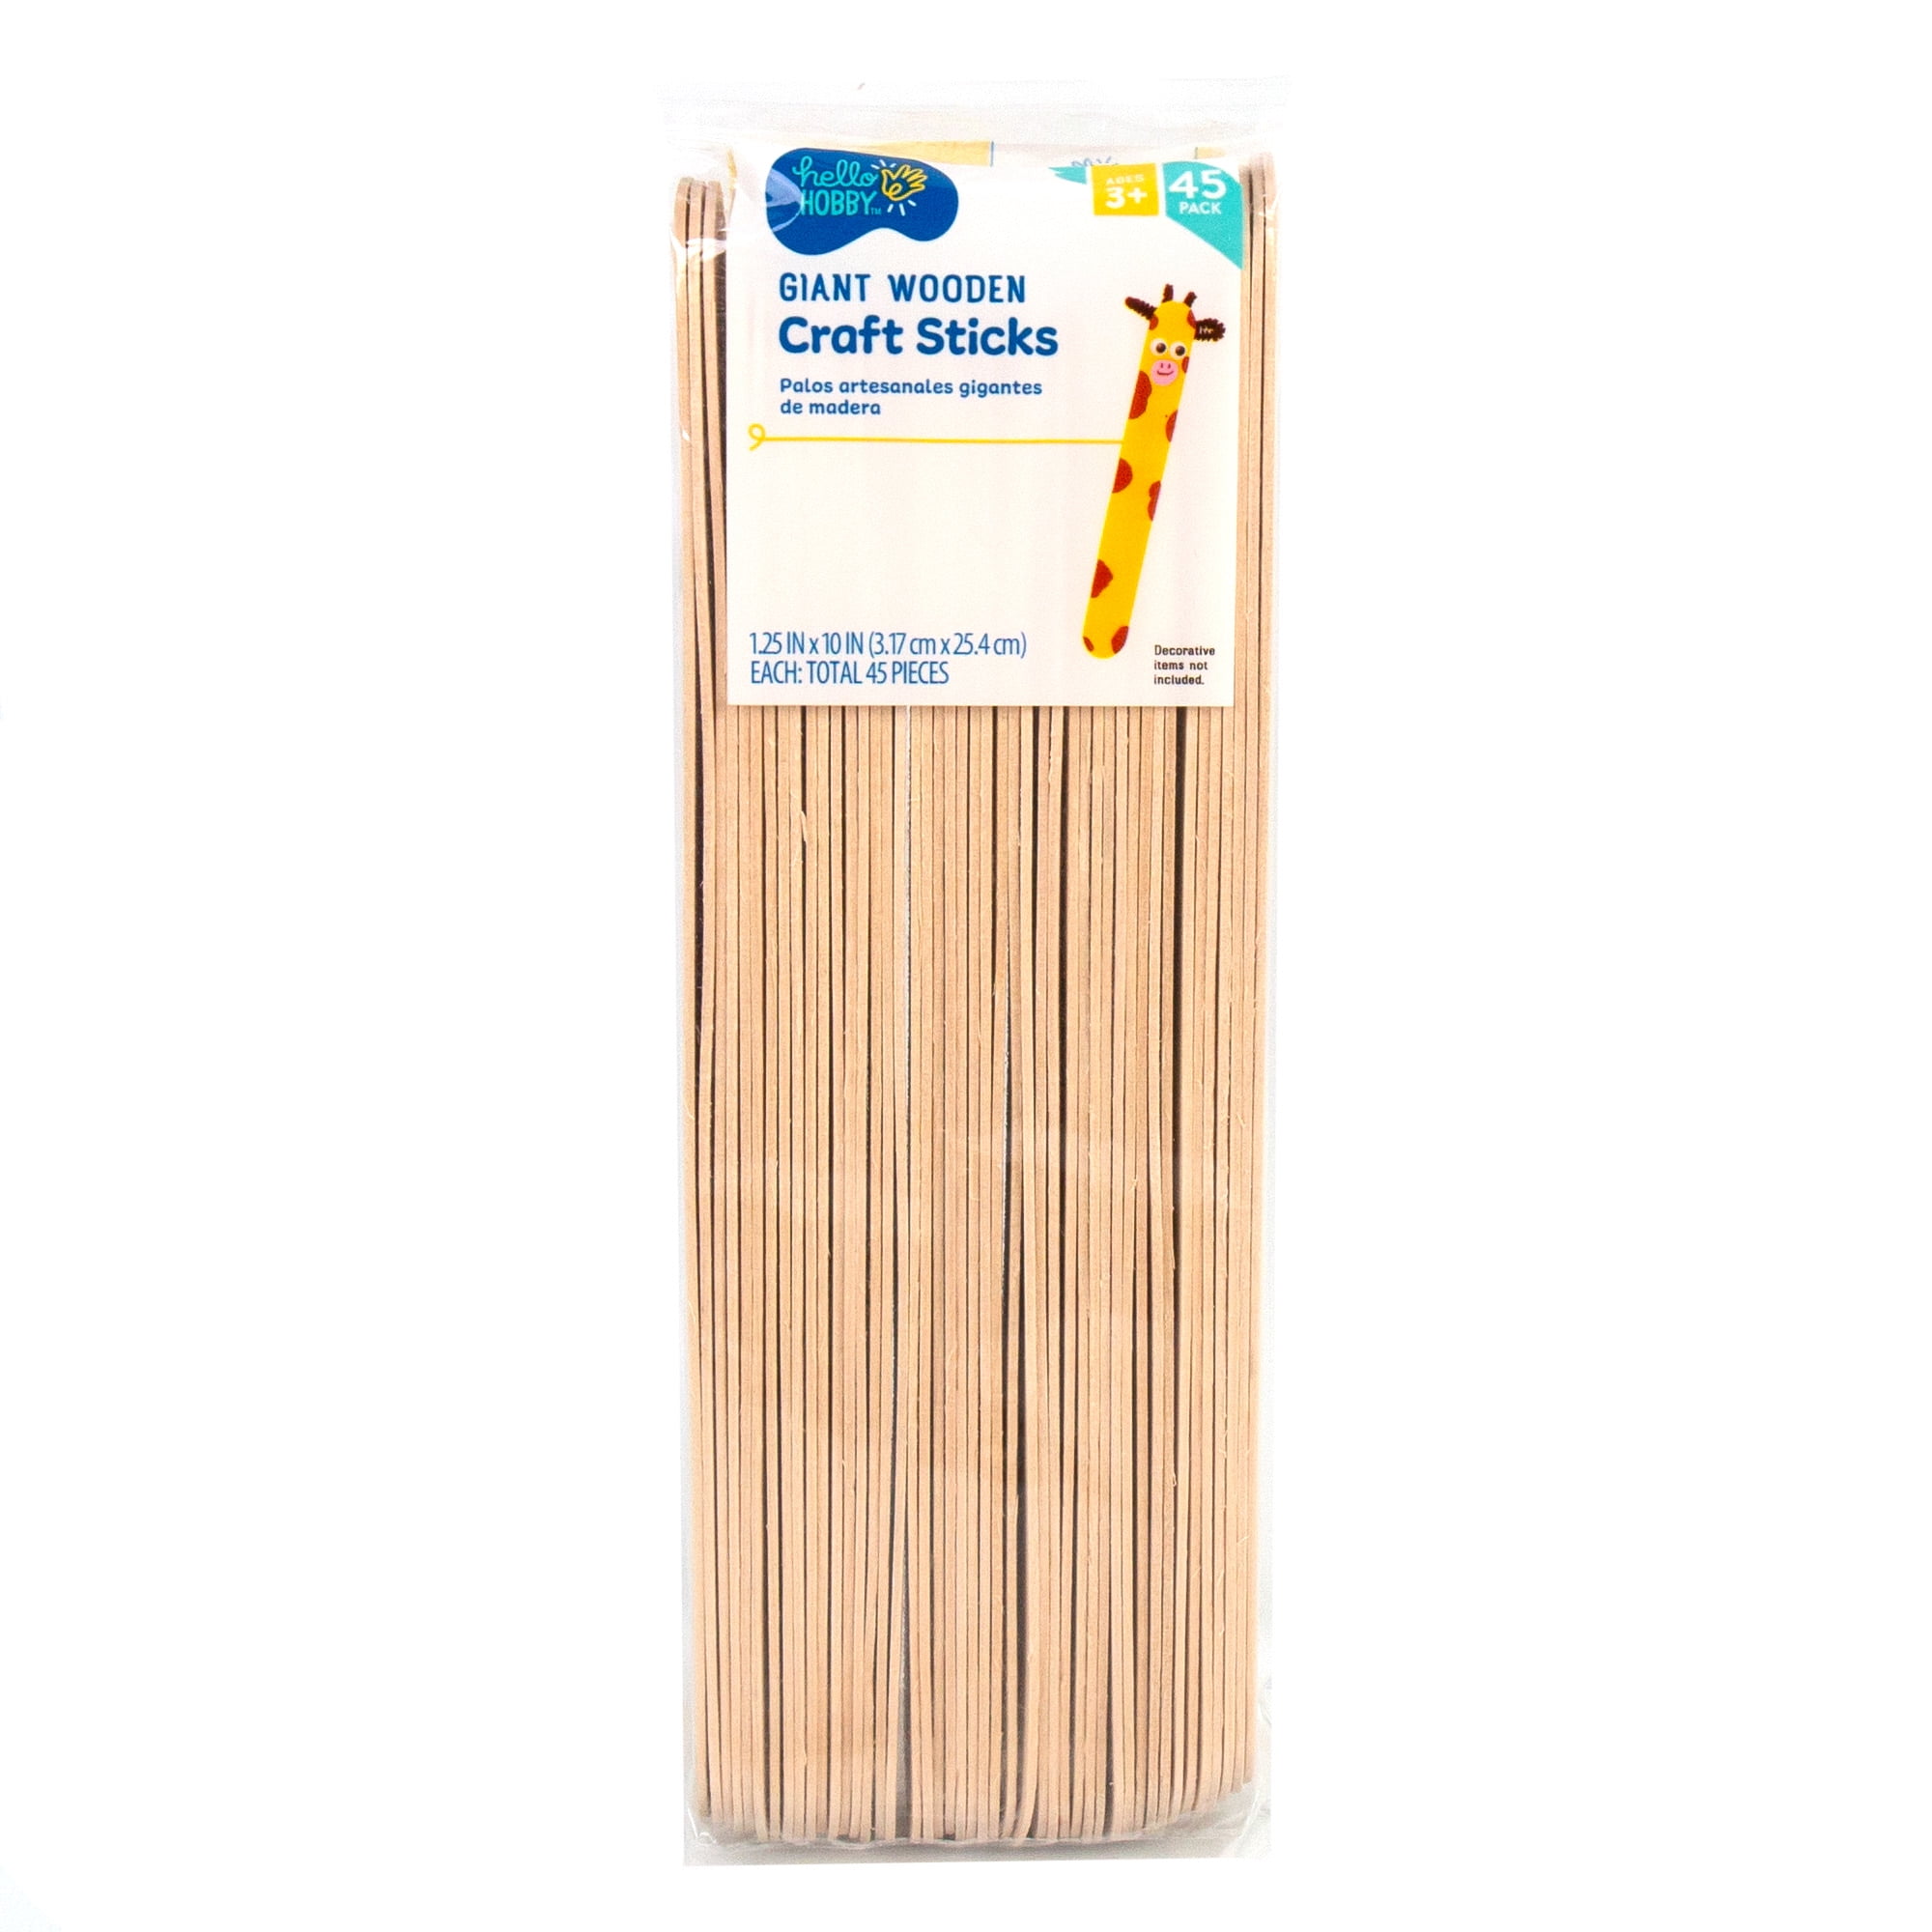 Extra Large Wood Craft Sticks, Natural, 10-Inch, 10-Count - Walmart